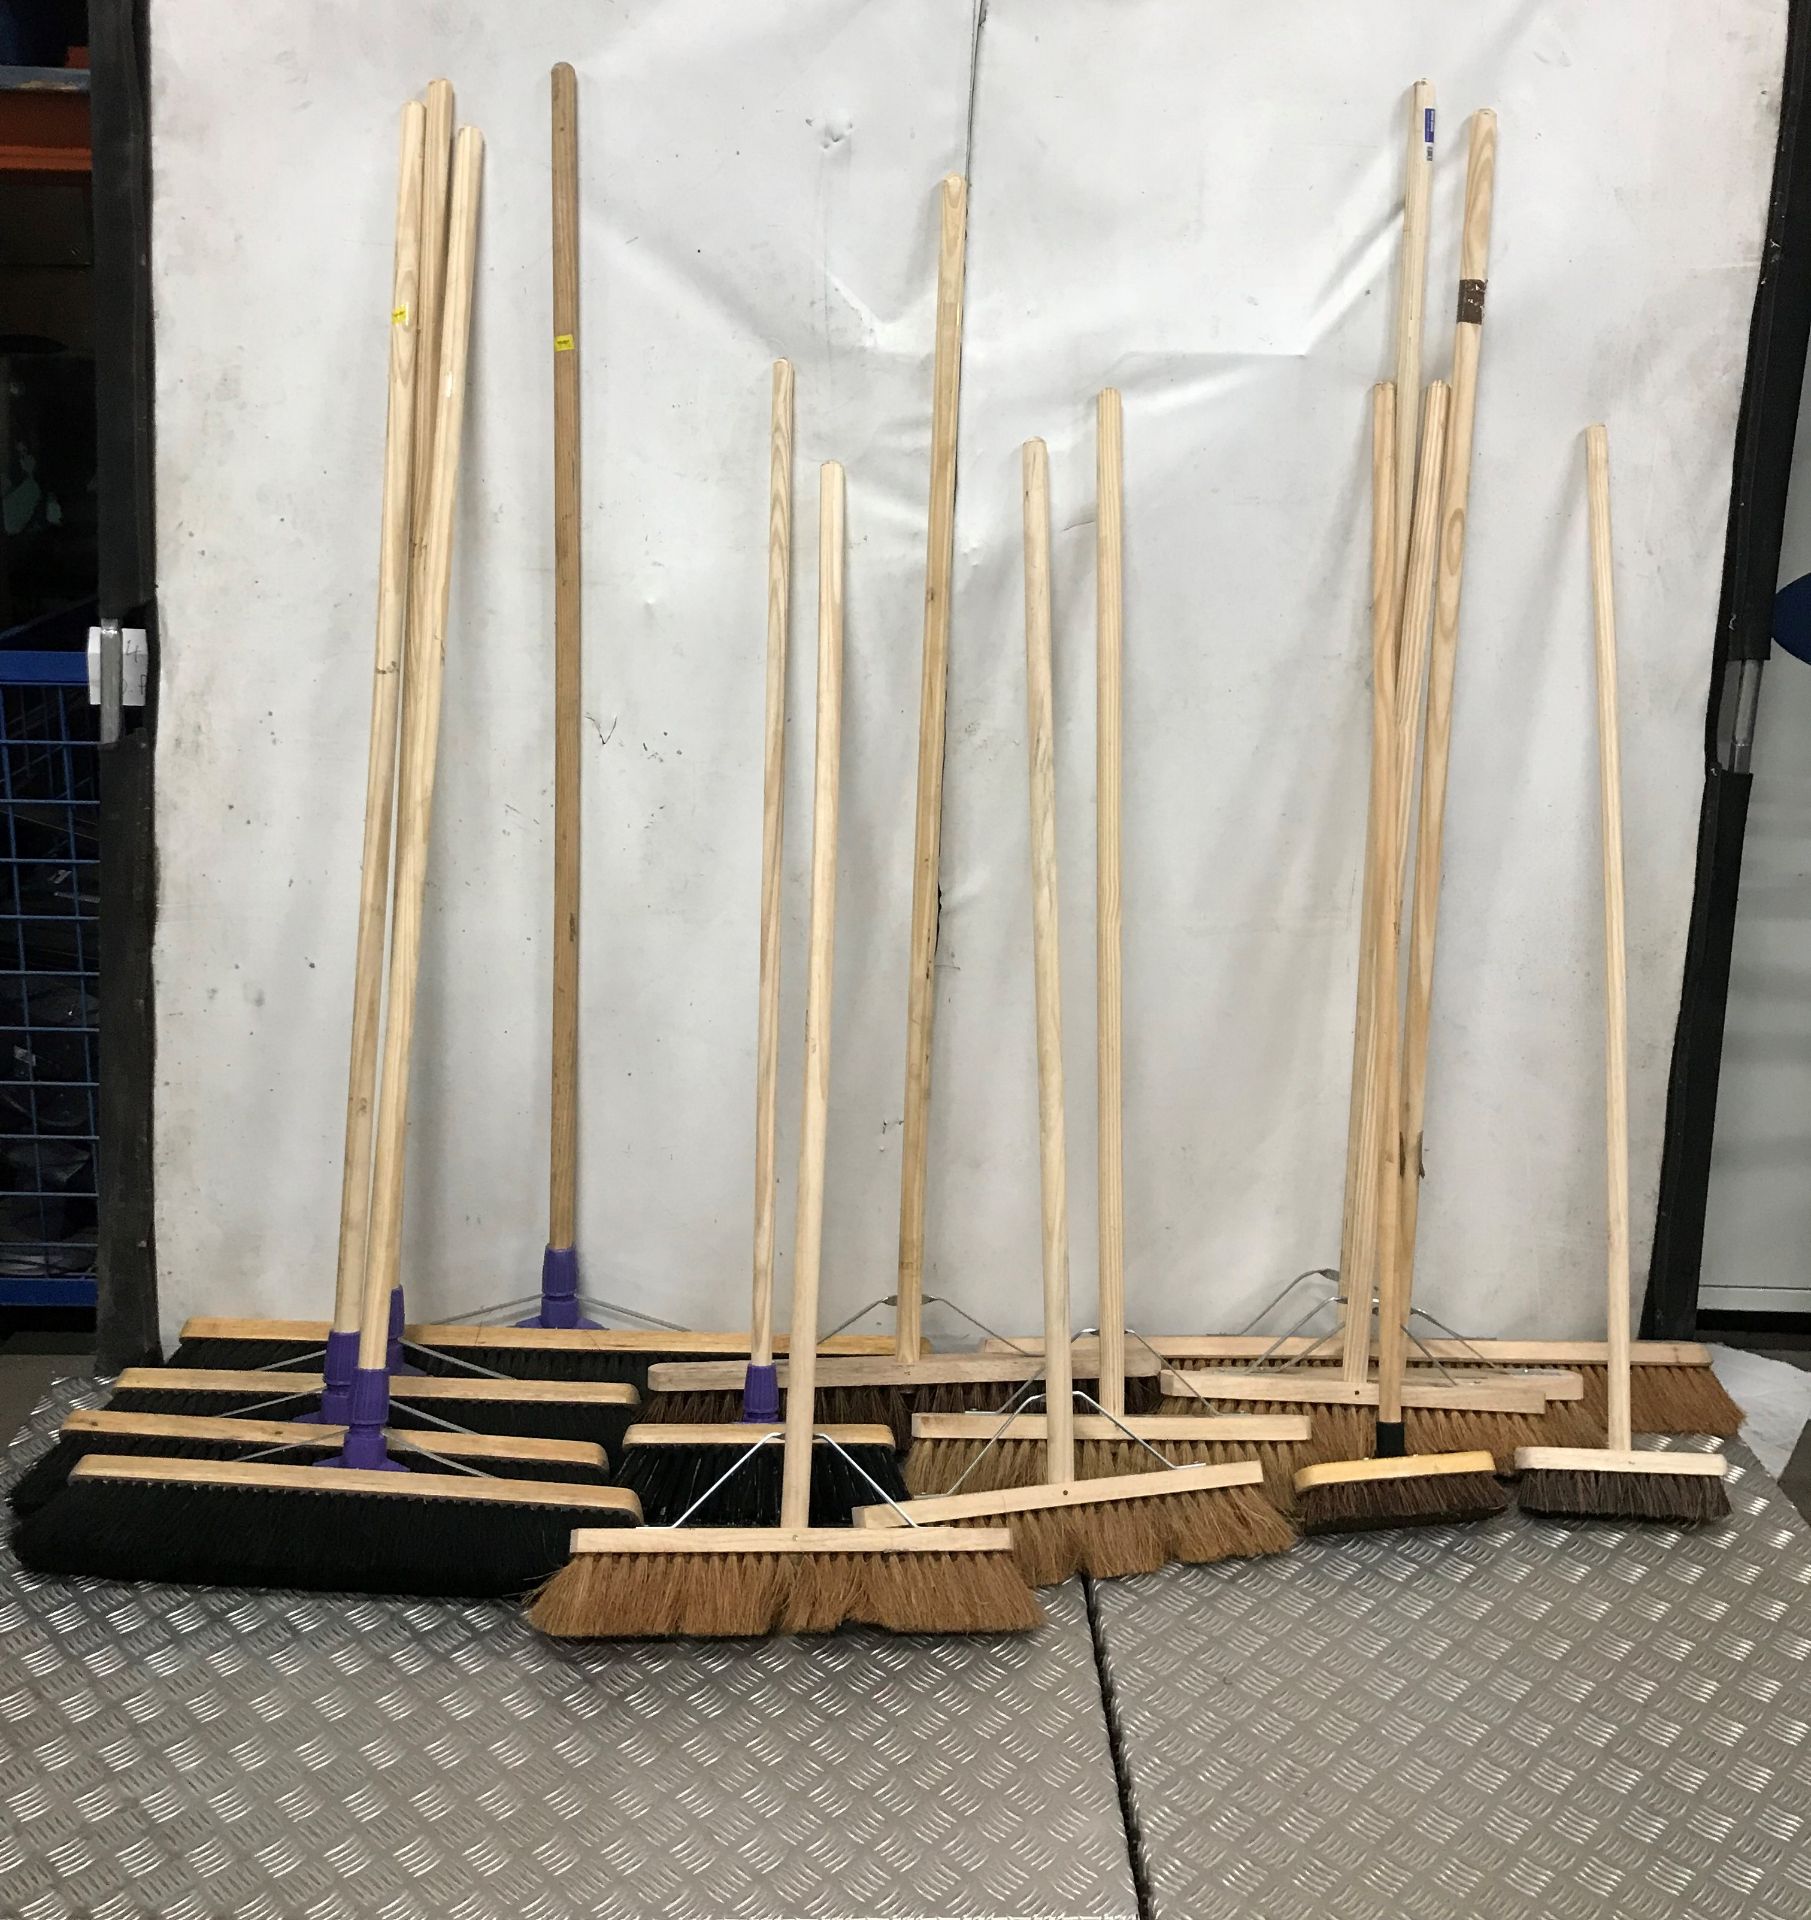 22 x Wooden Soft Brooms, Paving Brushes & Window Squeegees